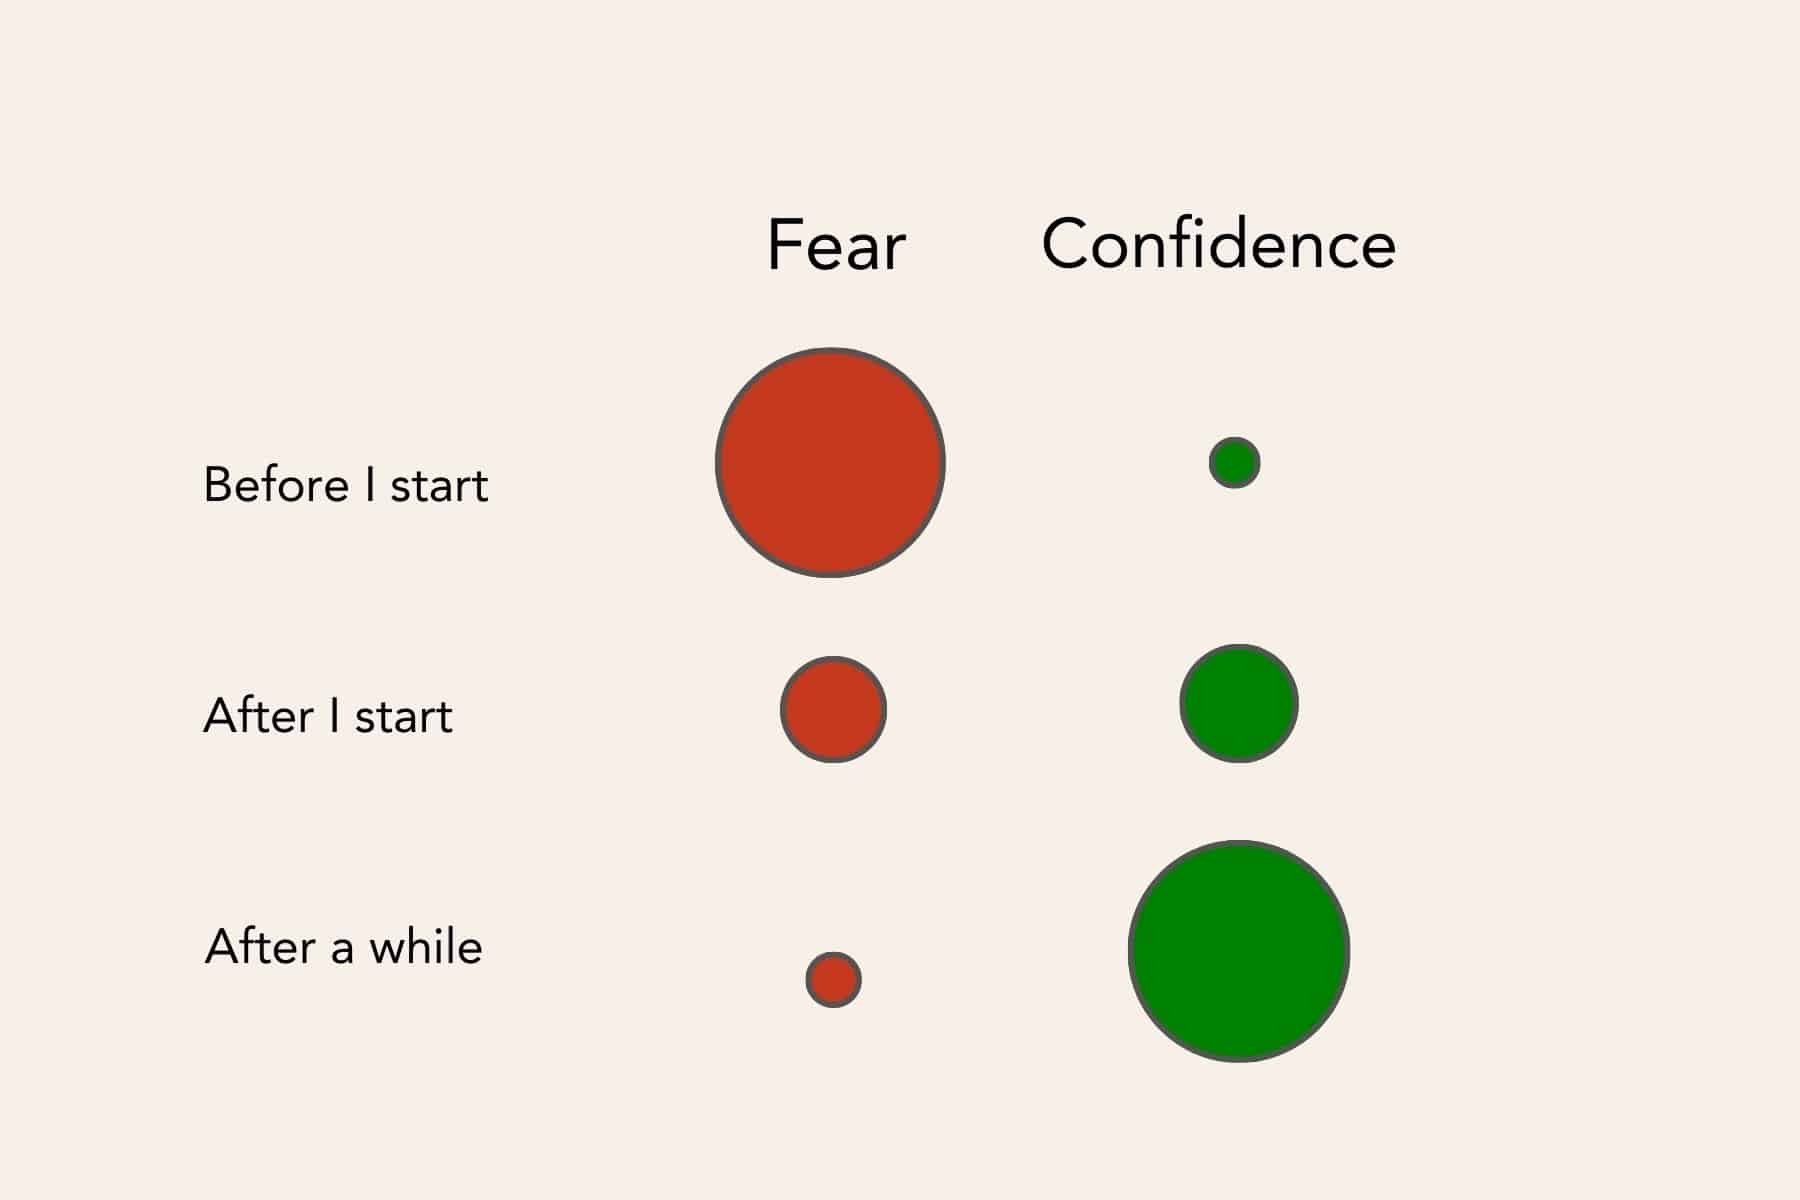 Once you get started, fear abates and confidence grows